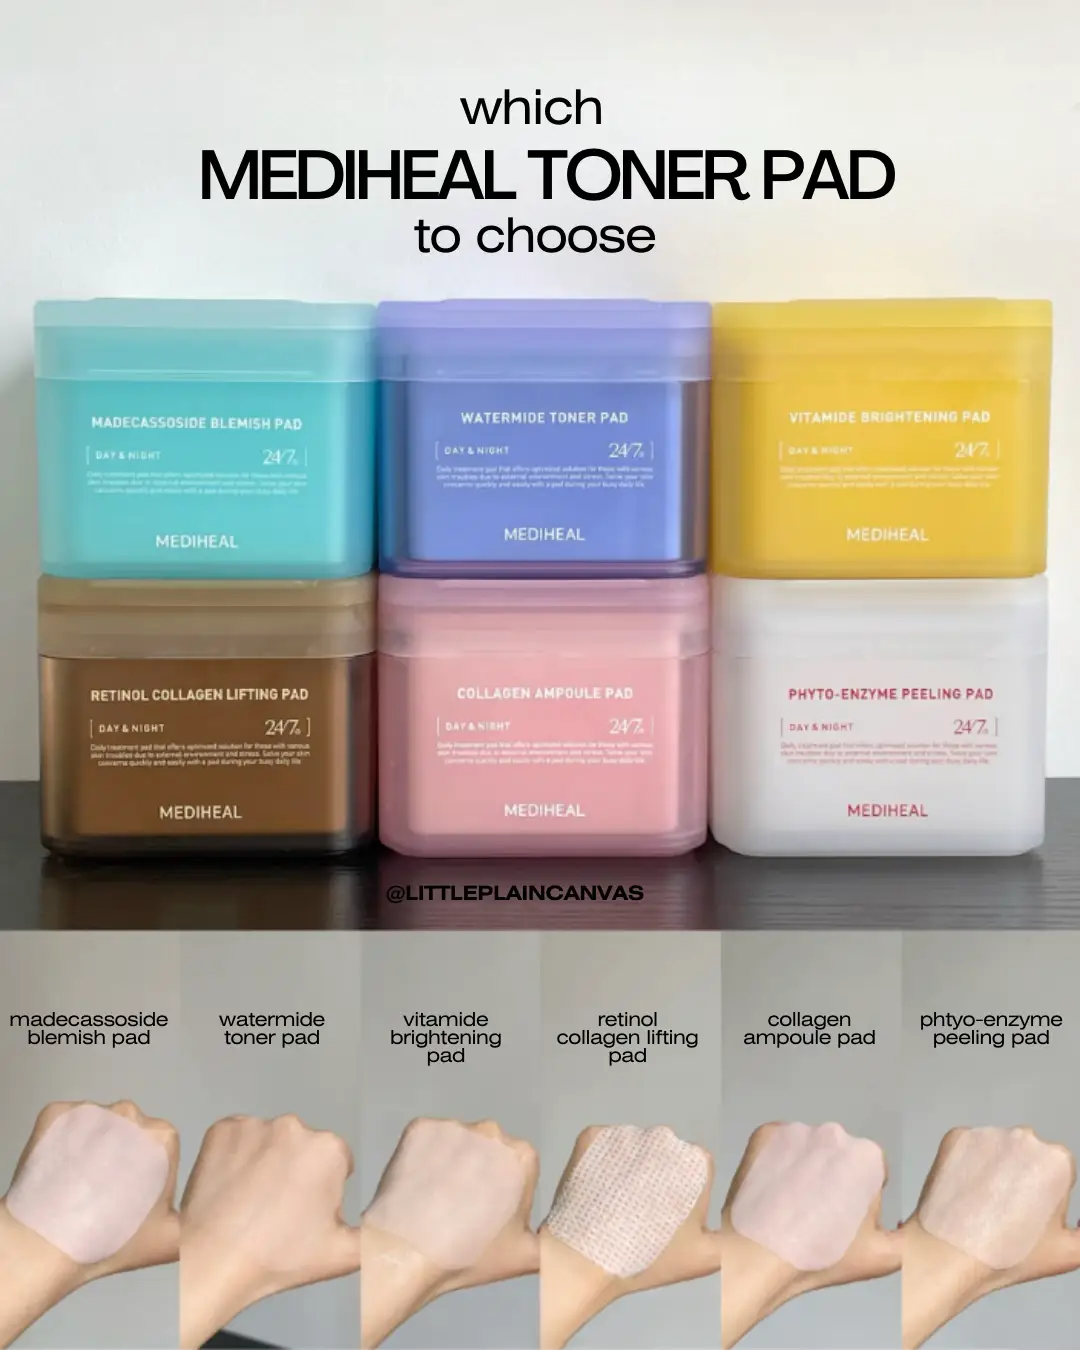 So many toner pads which one do I use? 's images(0)